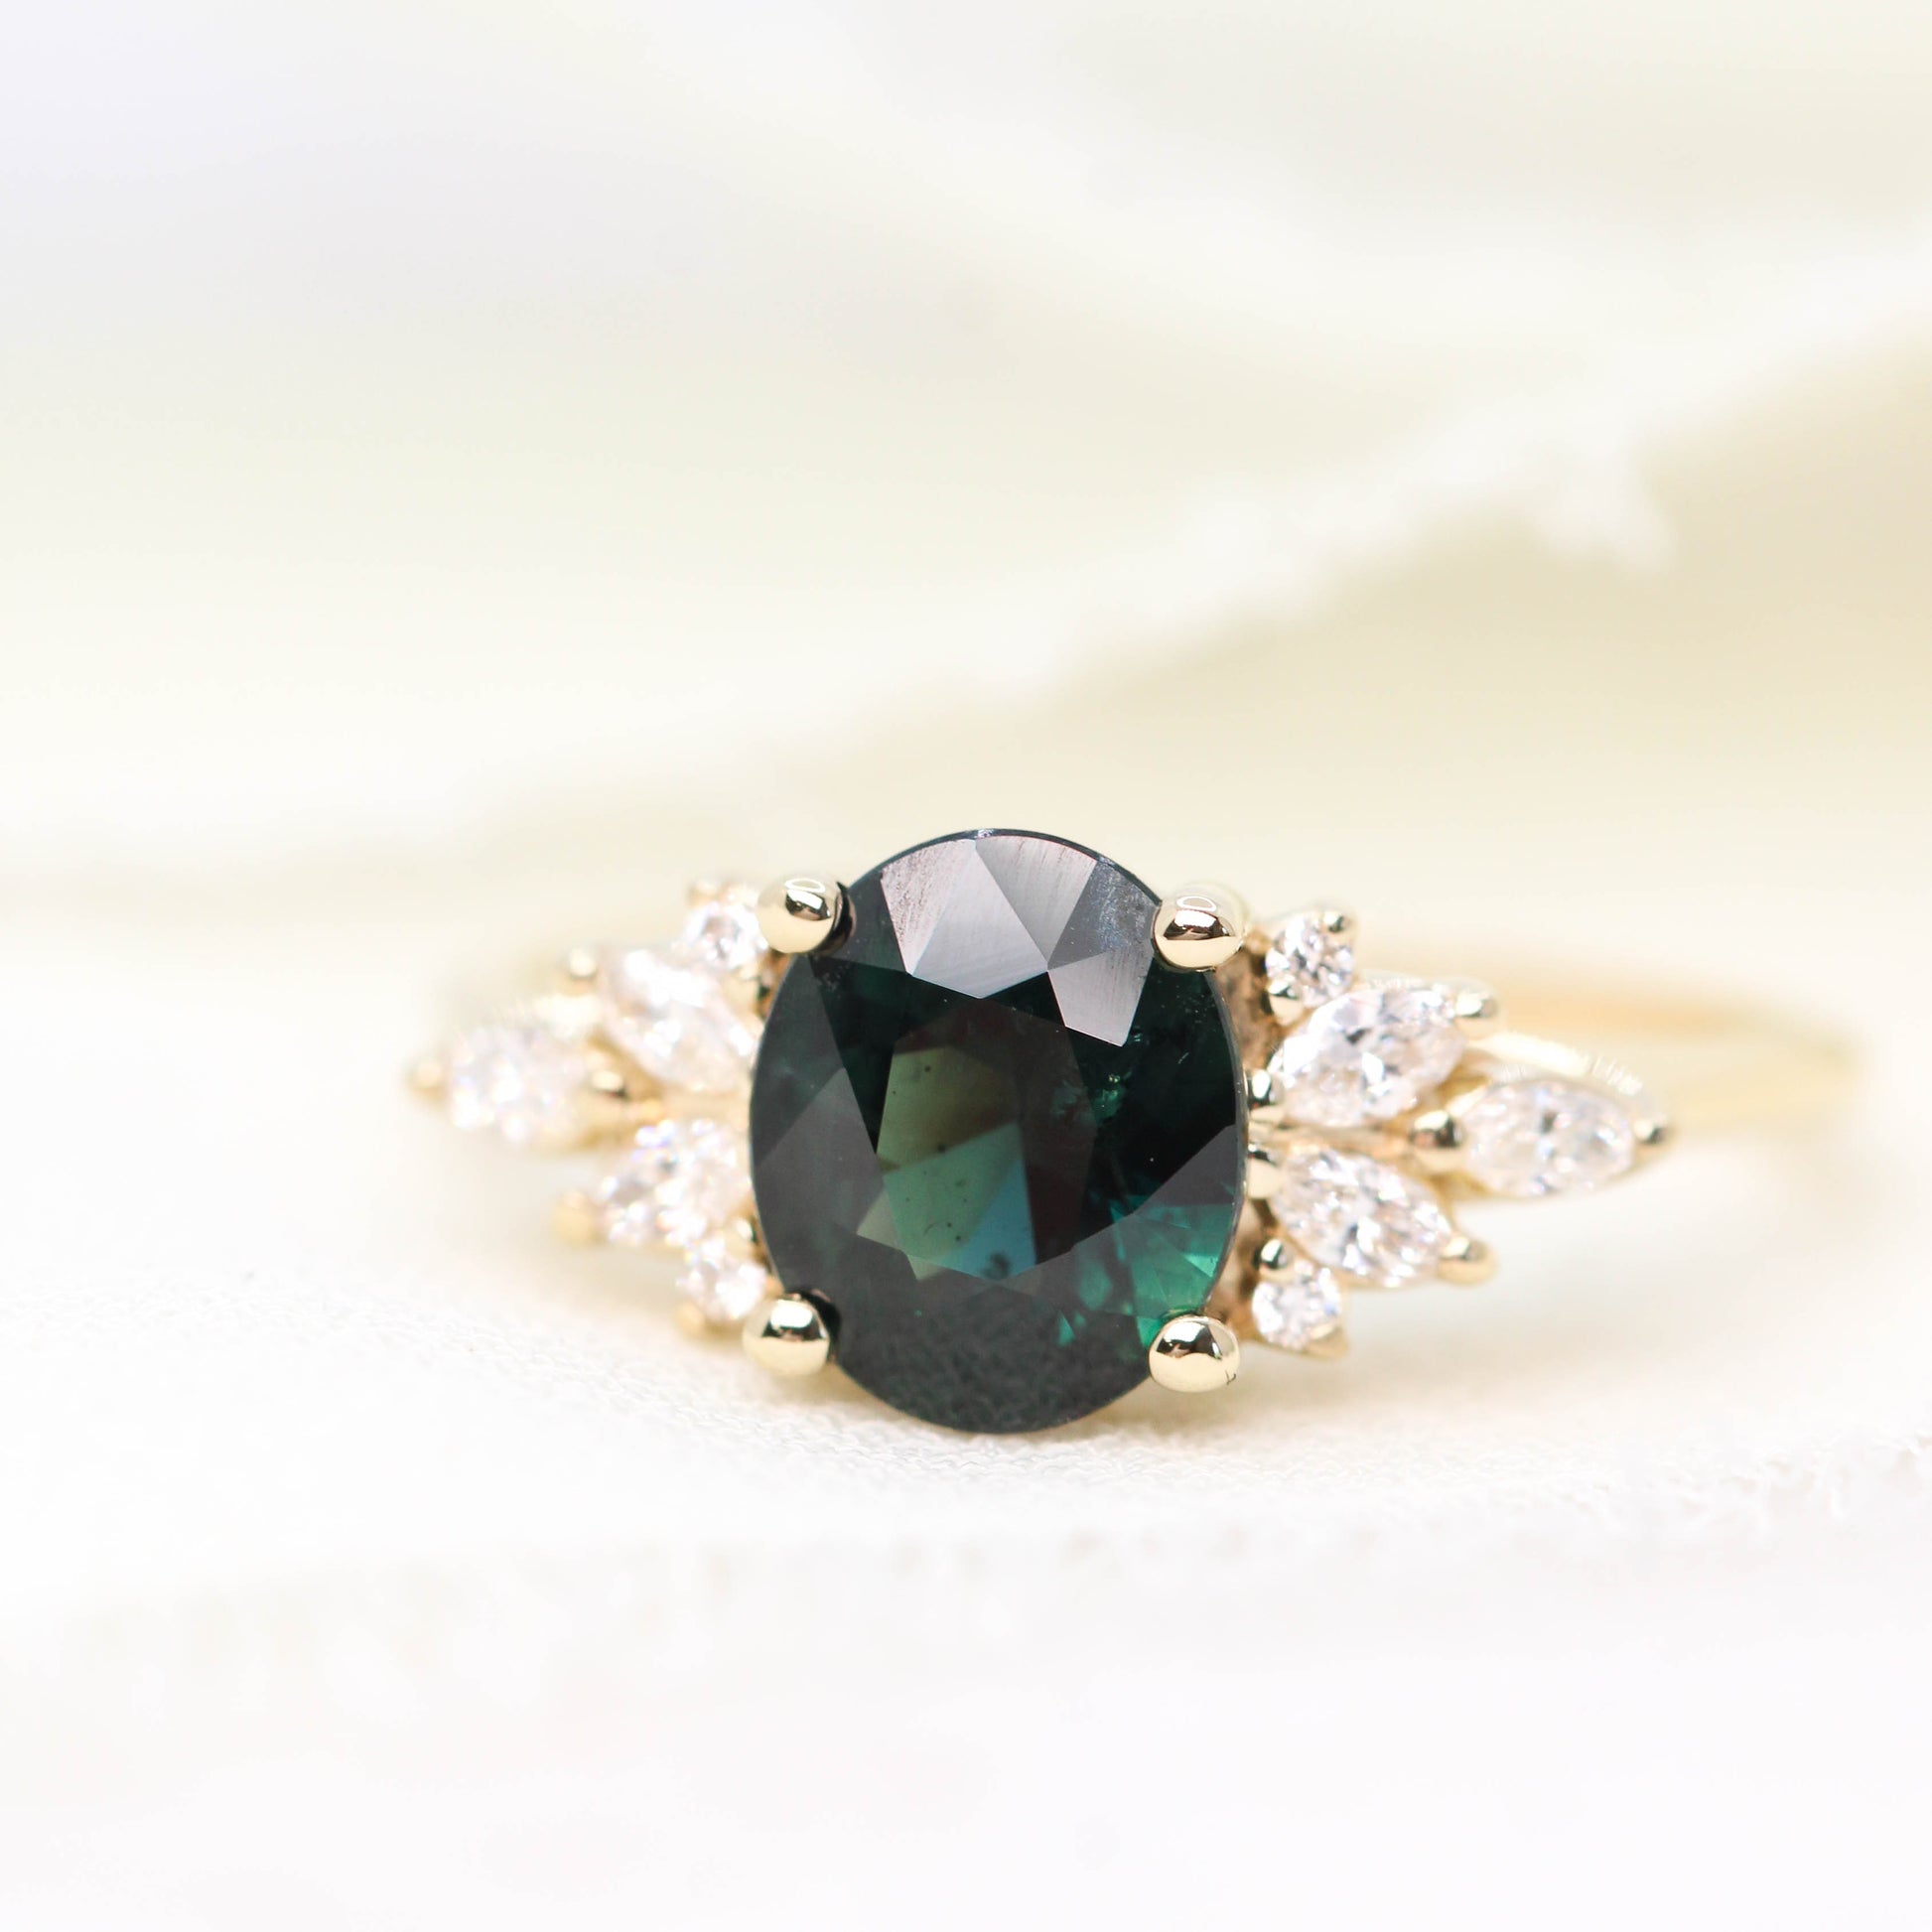 Odette Ring with a 1.29 Carat Teal Oval Sapphire and White Accent Diamonds in 14k Yellow Gold - Ready to Size and Ship - Midwinter Co. Alternative Bridal Rings and Modern Fine Jewelry